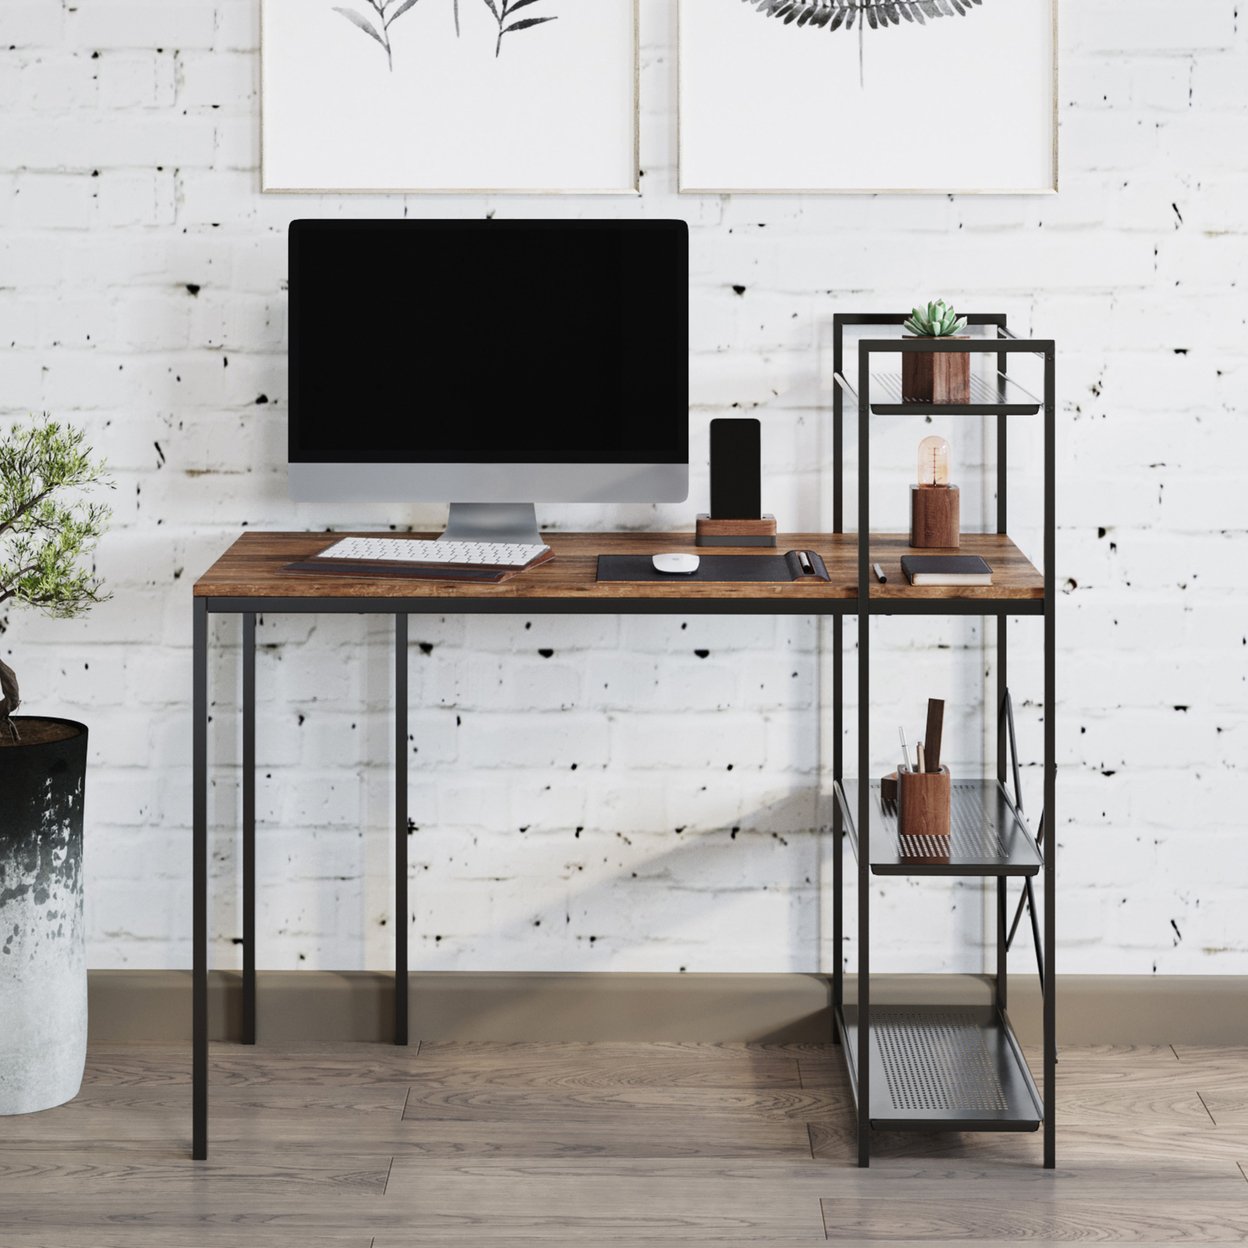 All-in-One Computer Desk With Shelves Modern Style Wood Steel For Home Office